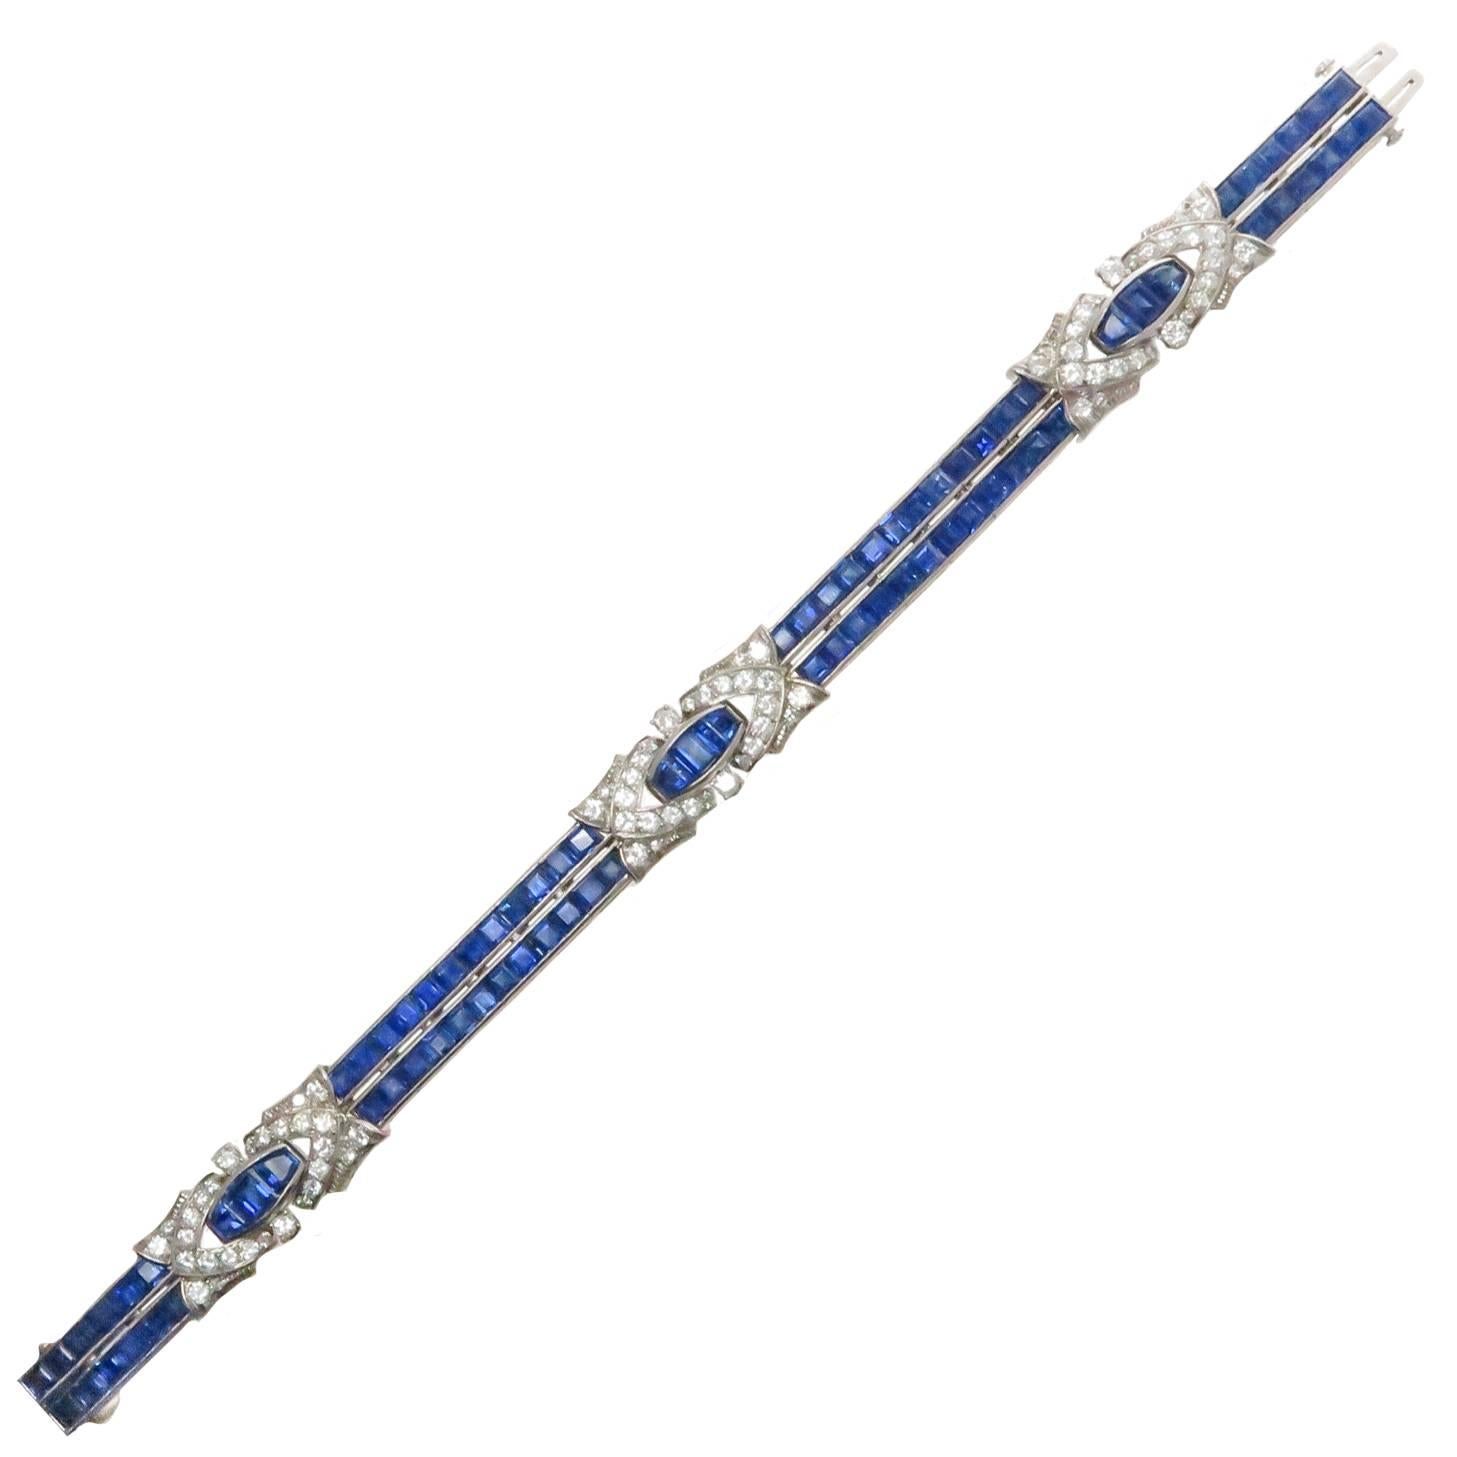 Circa 1930s Oscar Heyman Art Deco Platinum Bracelet, very soft and flexible and measuring 7 inches in length, 7/16 inch wide and is set with 72 extremely fine color No heat Square cut Sapphires totaling approximately 8 Carats and 9 Tapered Sapphires